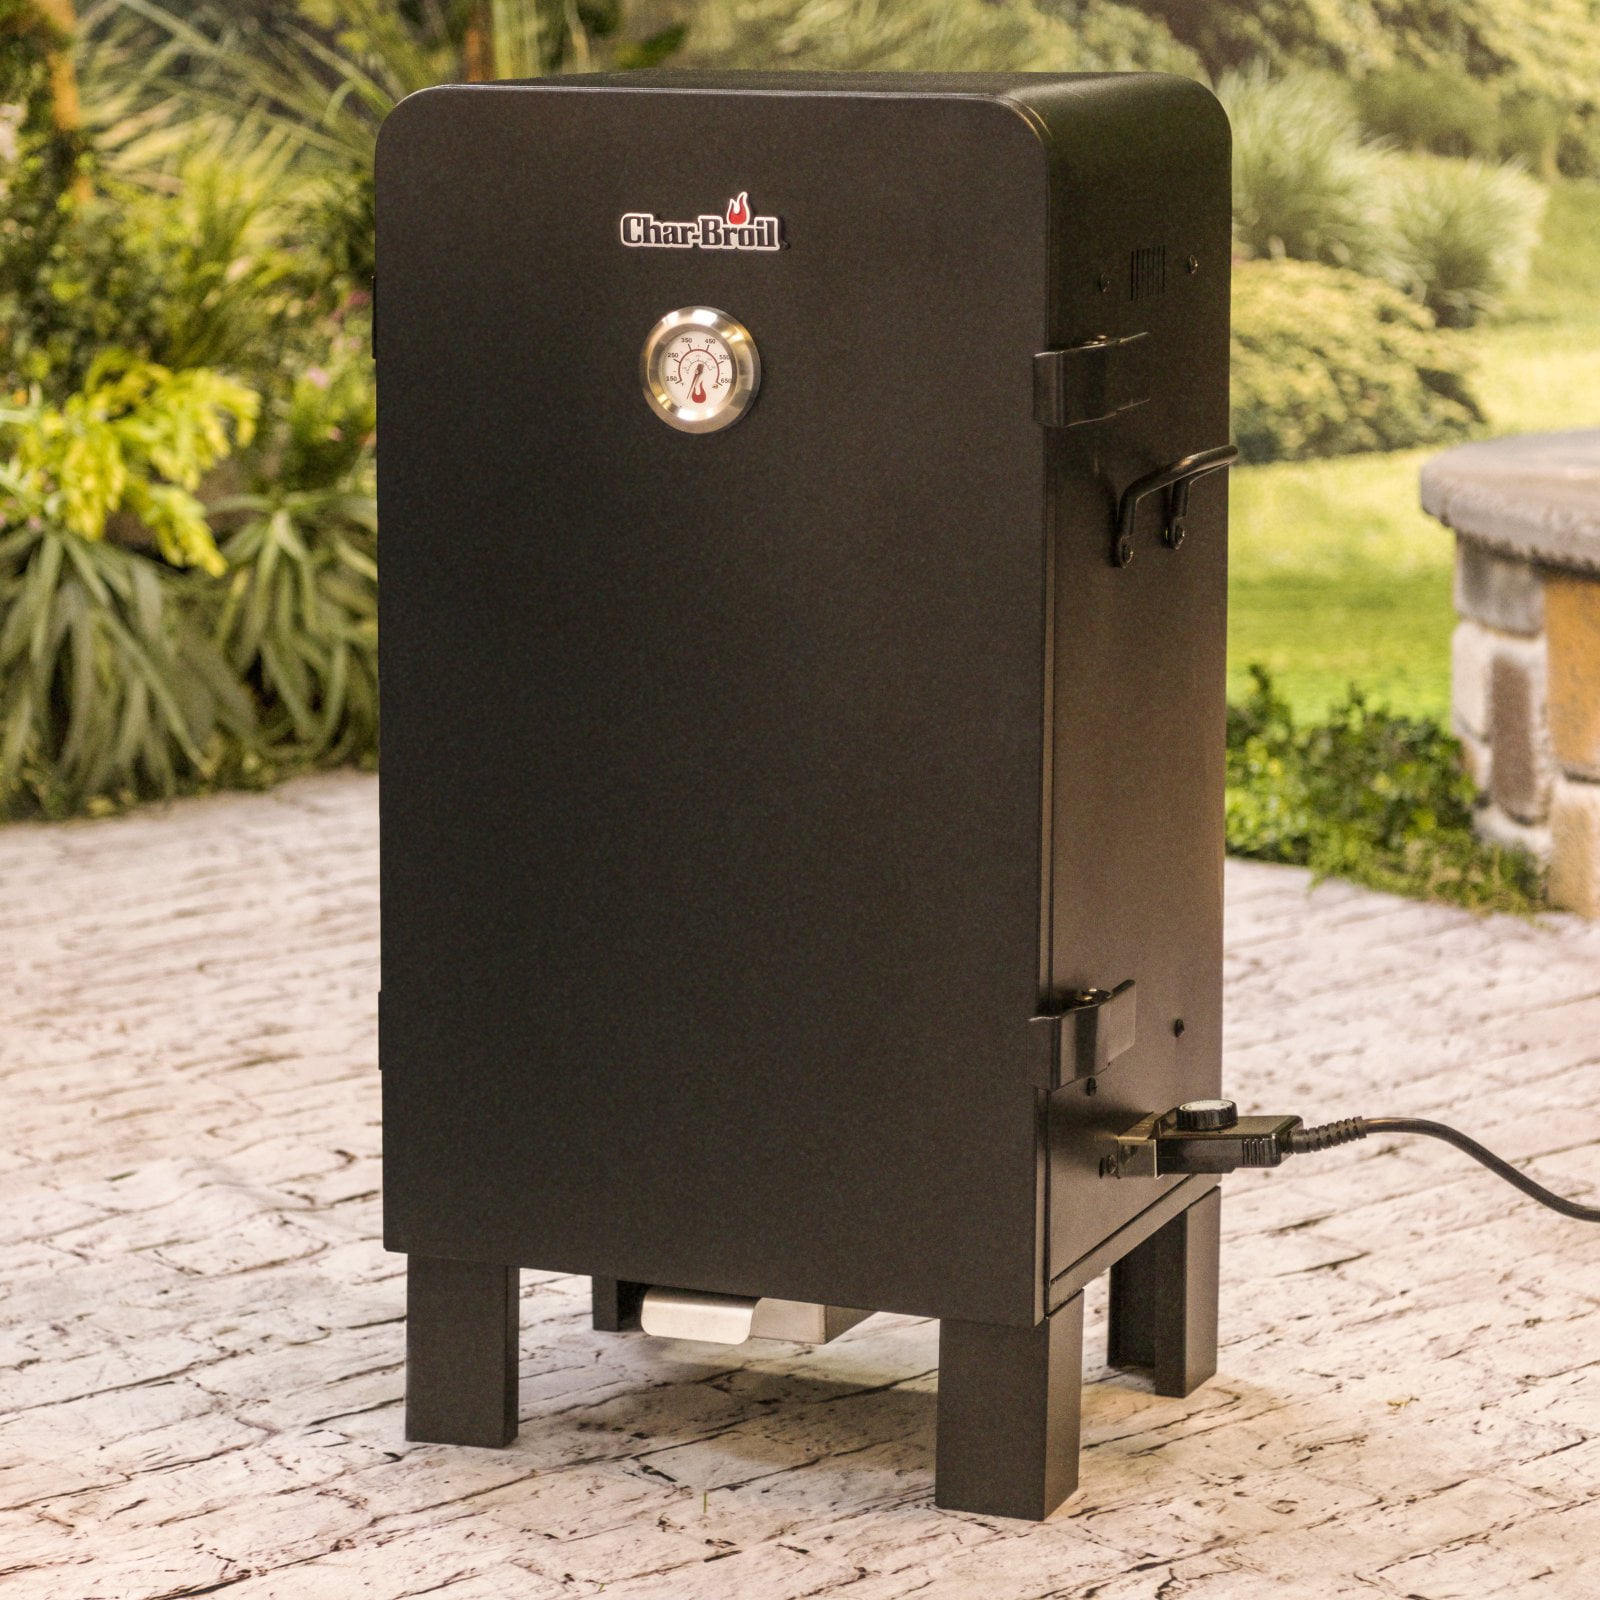  Digital Electric Smoker Stand for Masterbuilt 30-inch Digital Electric  Smokers, Fits Masterbuilt MB20071117, MB20070421 Leg Extension Kit  Accessories, Heavy-Duty Construction, Black : Patio, Lawn & Garden